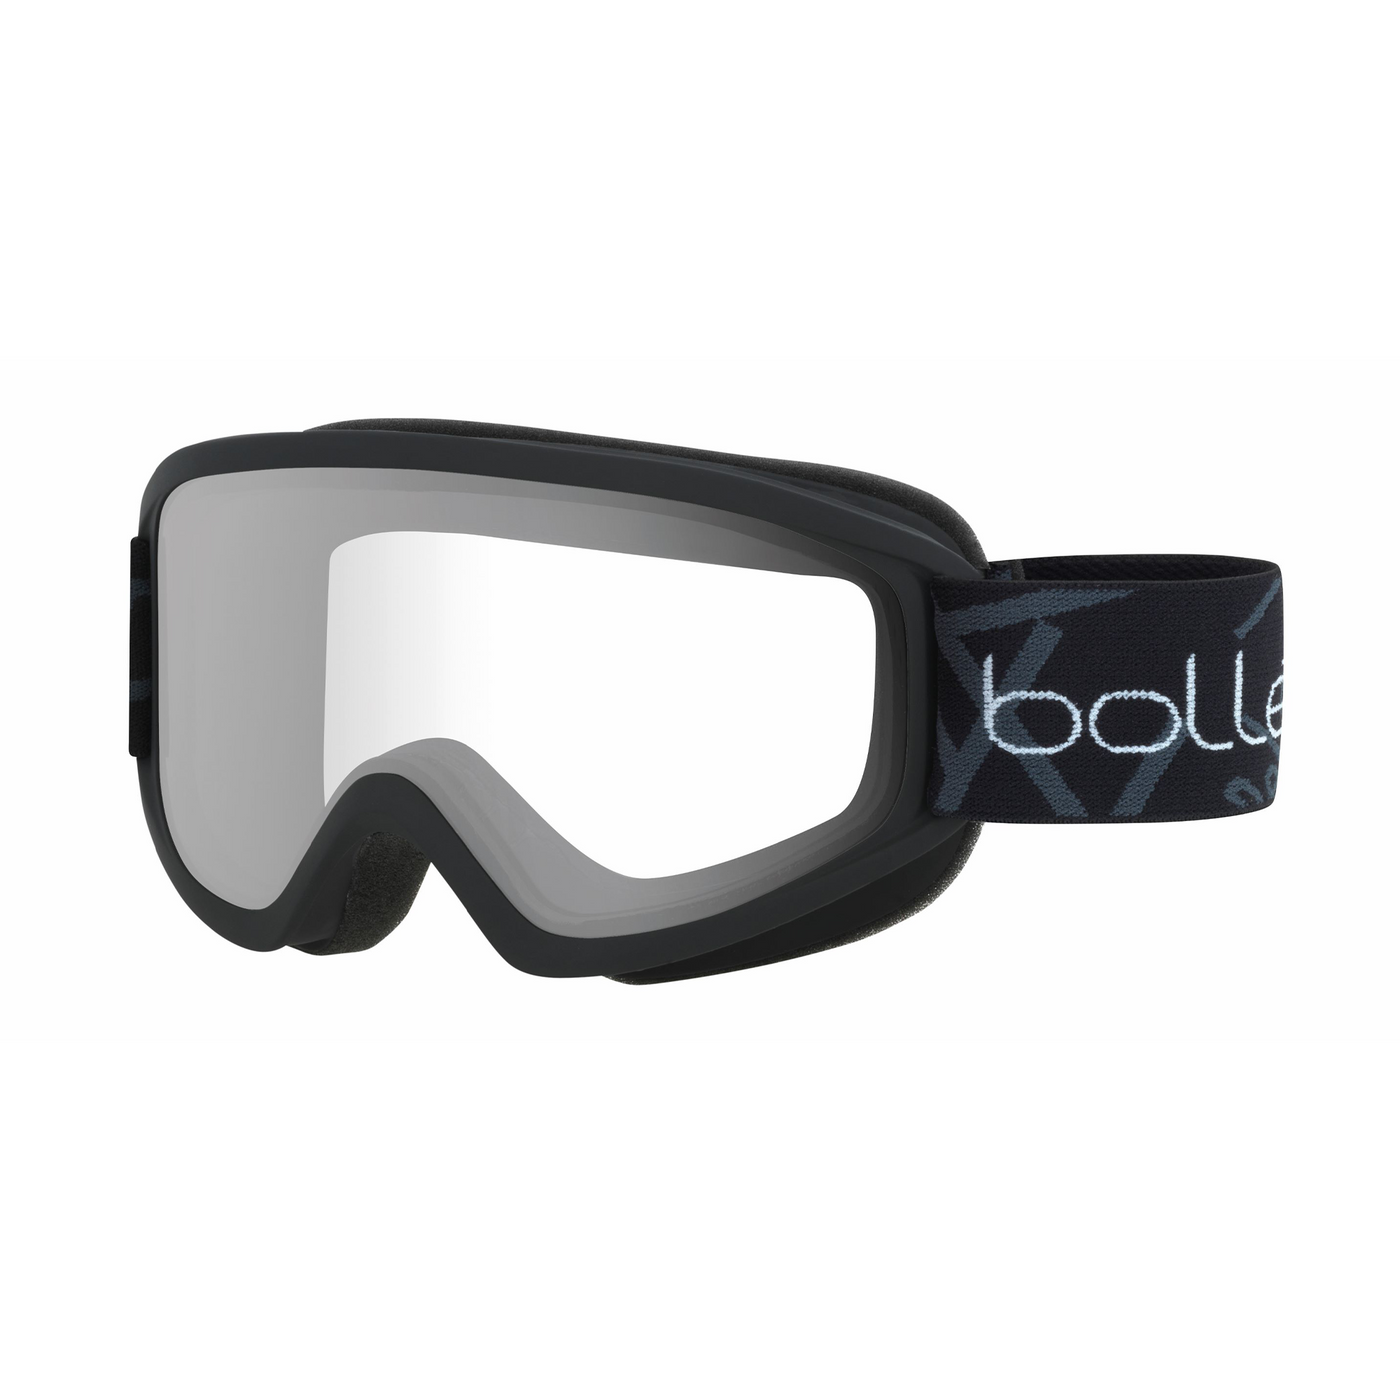 Bollé Freeze Ski Goggles - DISCONTINUED GOGGLES Bolle Matte Black with Clear Lens  